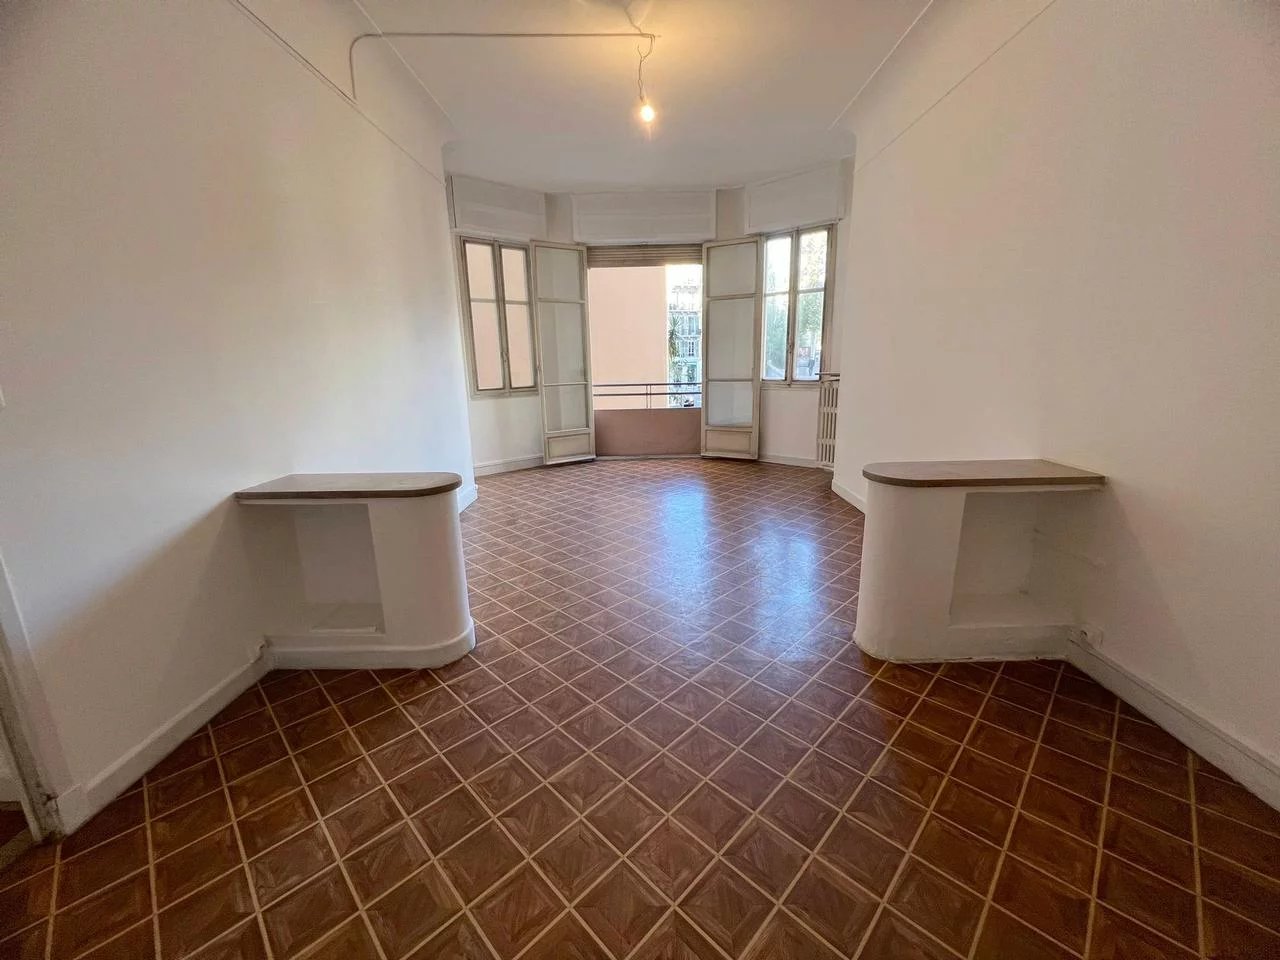 Appartement  2 Rooms 64m2  for sale   259 000 €